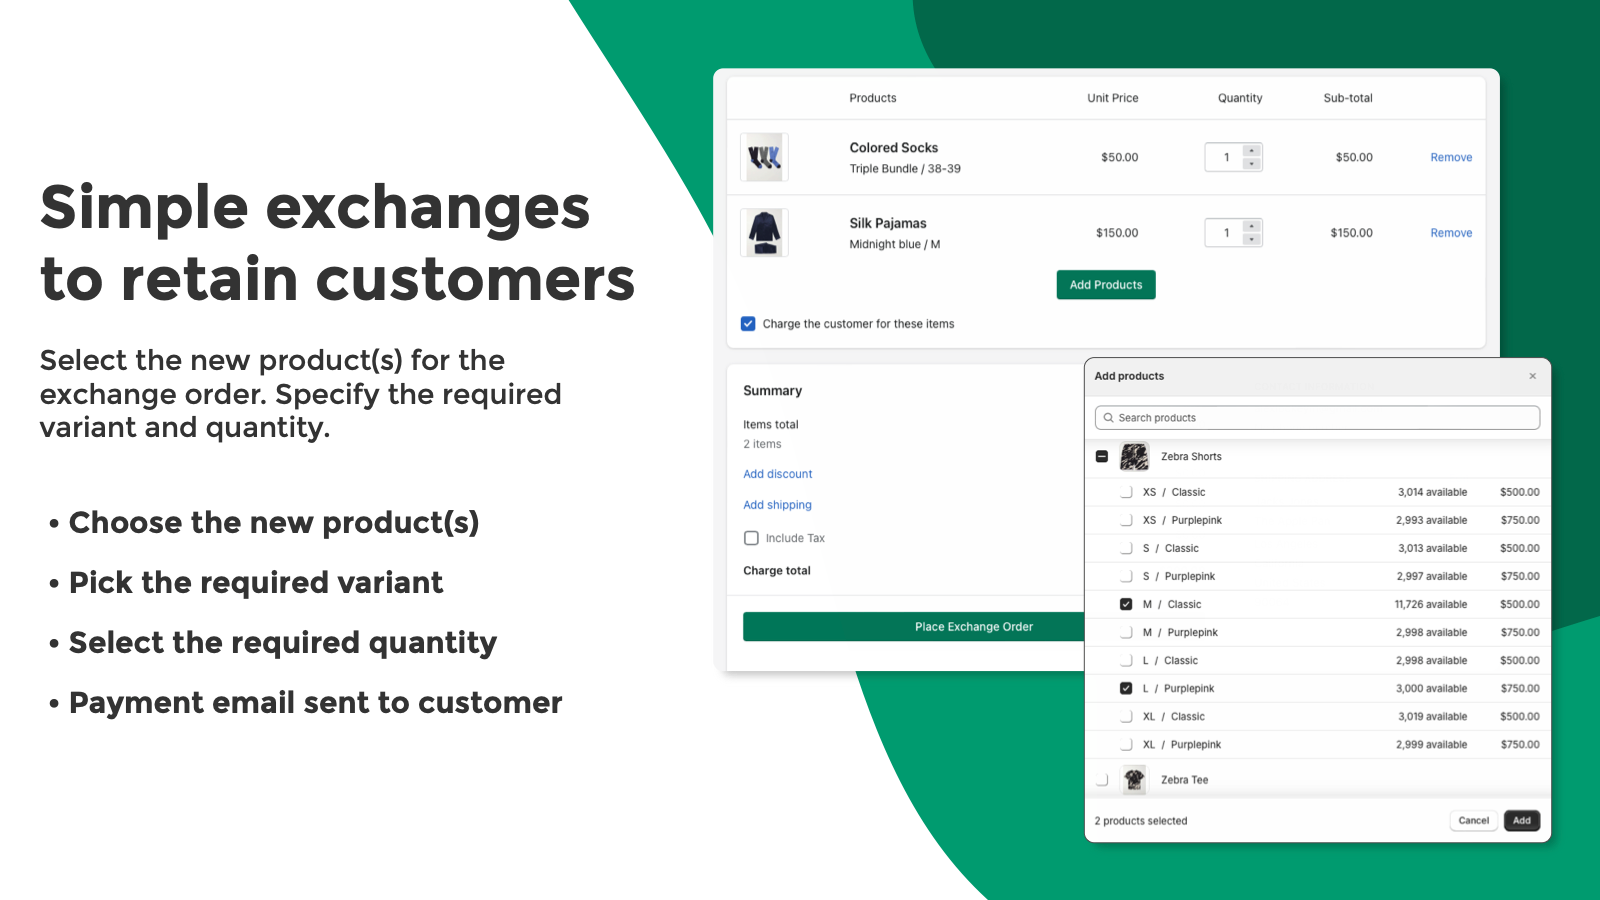 Simple and Easy Exchange Orders to help retain customers